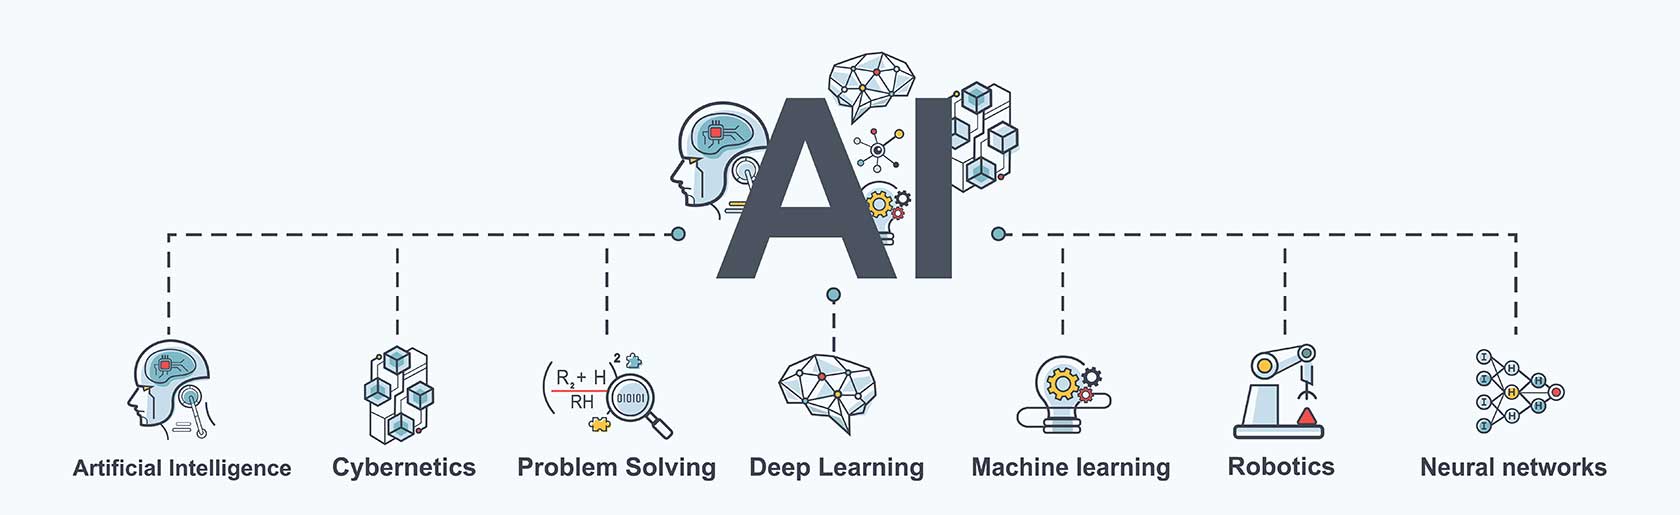 What Is AI Used For Today?